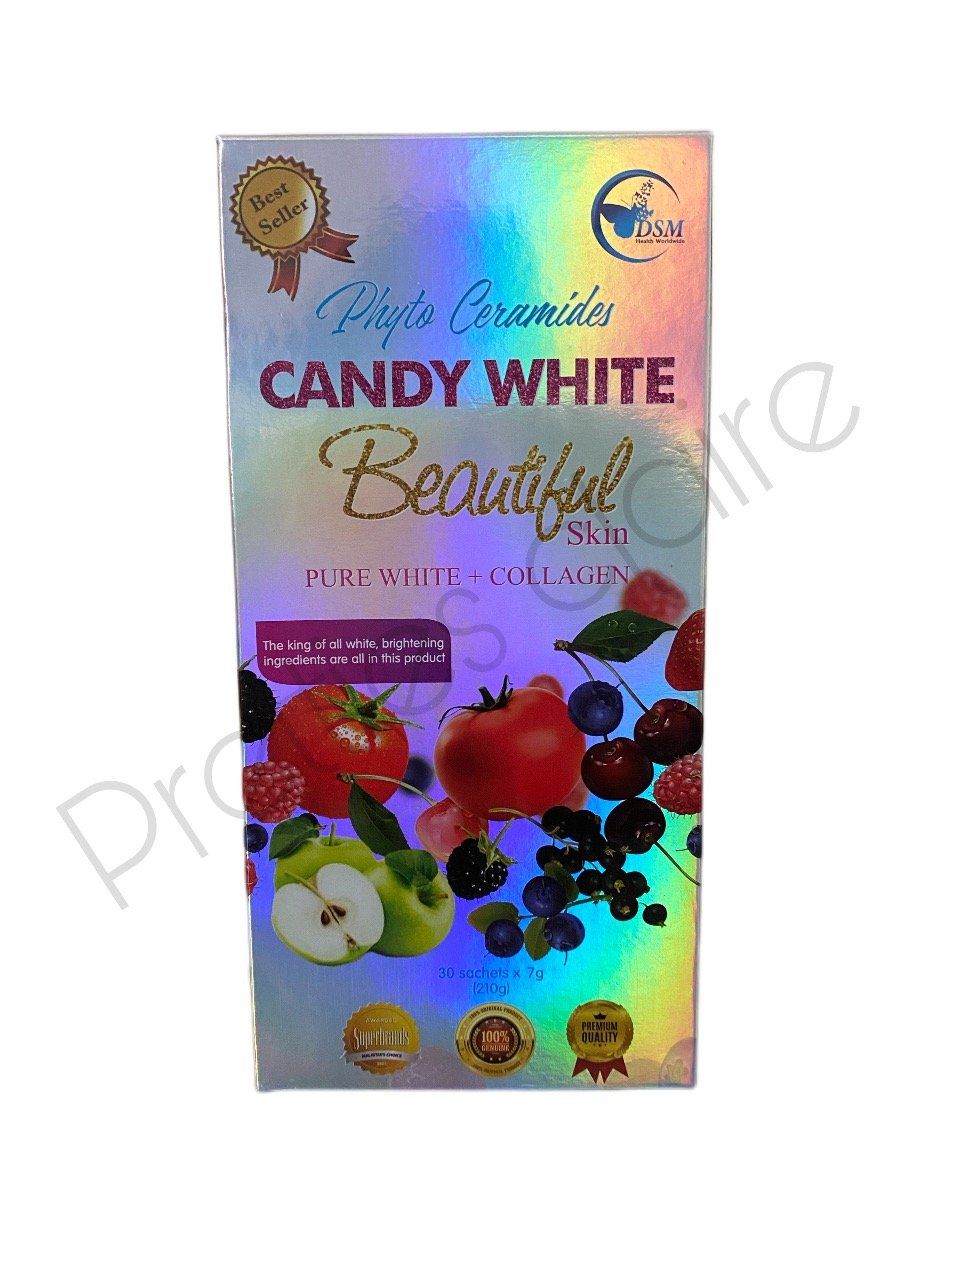 CANDY WHITE